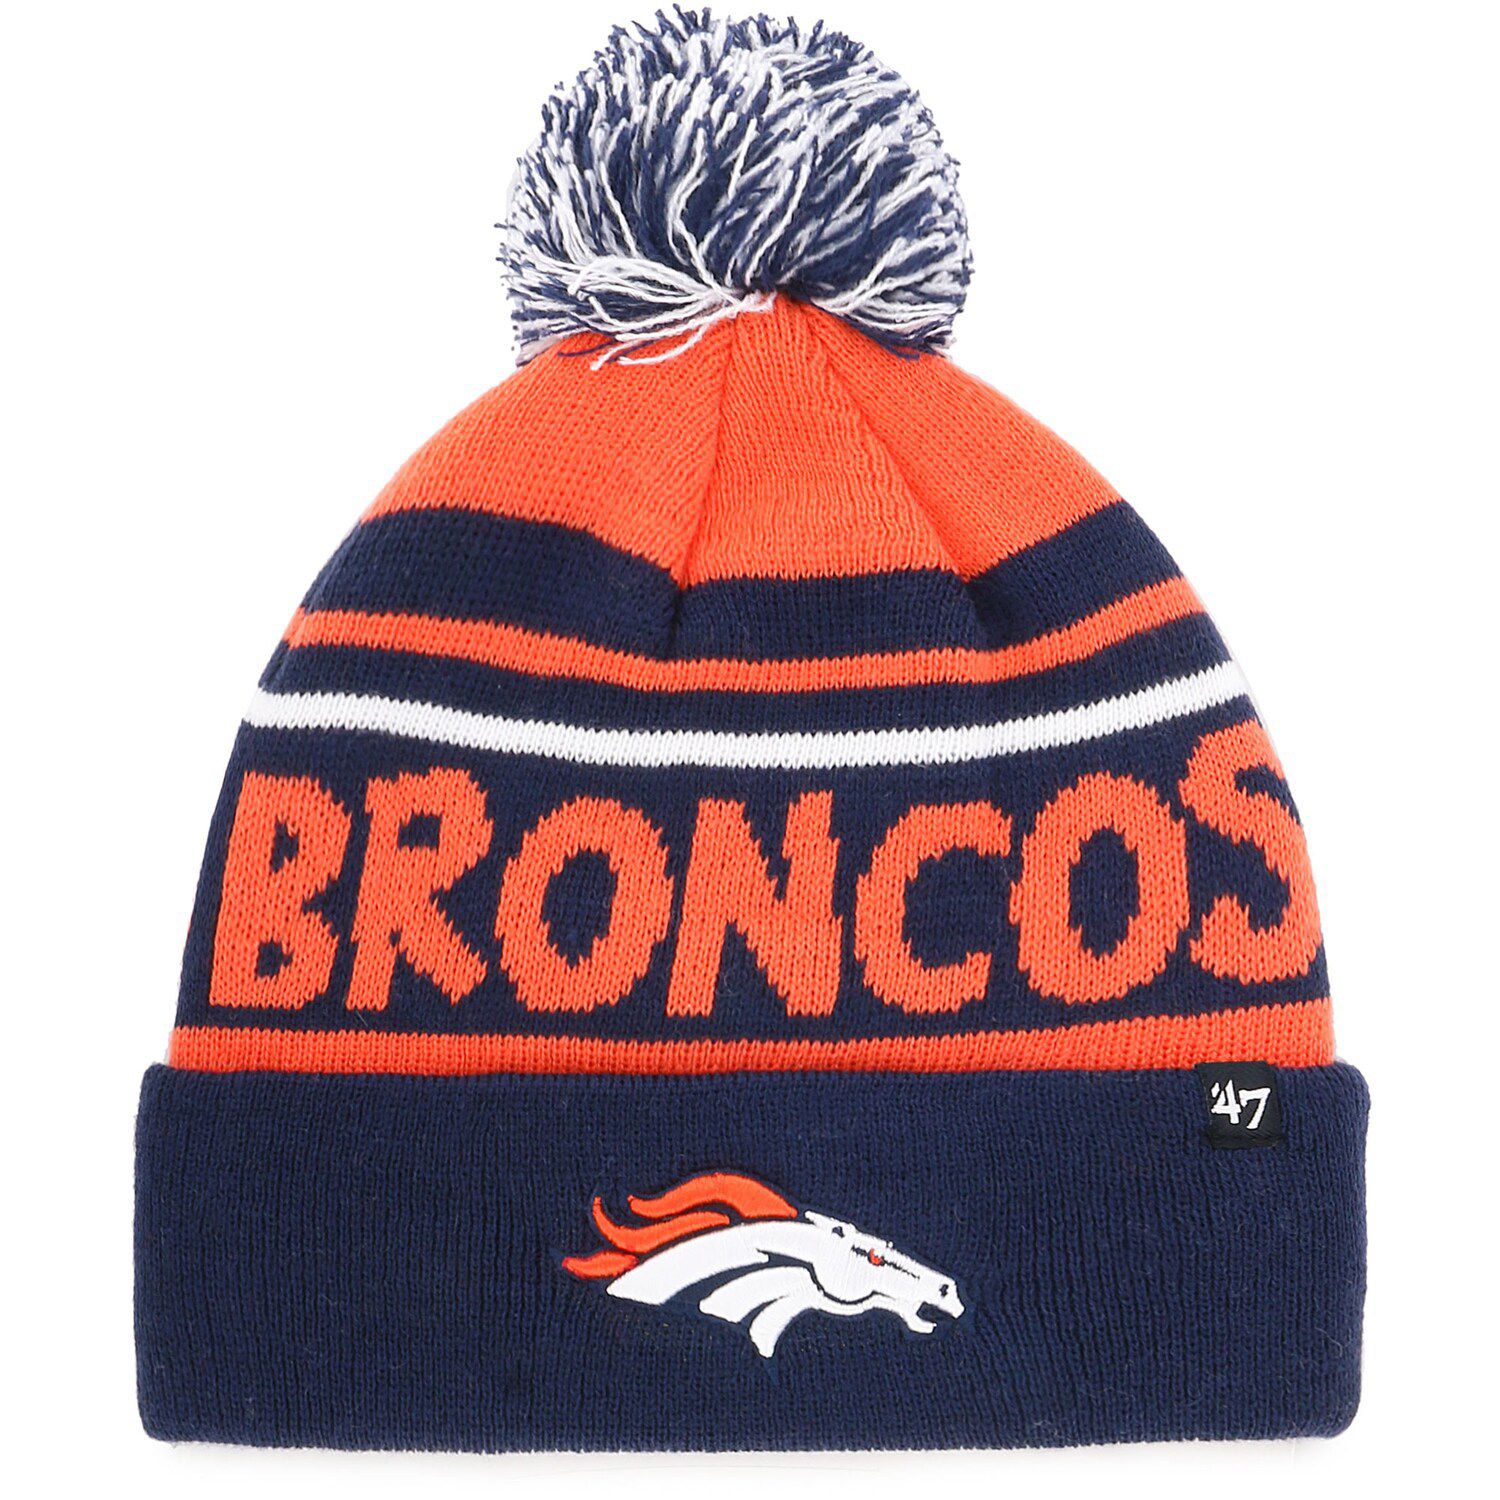 Image for Unbranded Youth '47 Orange/Navy Denver Broncos Playground Cuffed Knit Hat With Pom at Kohl's.